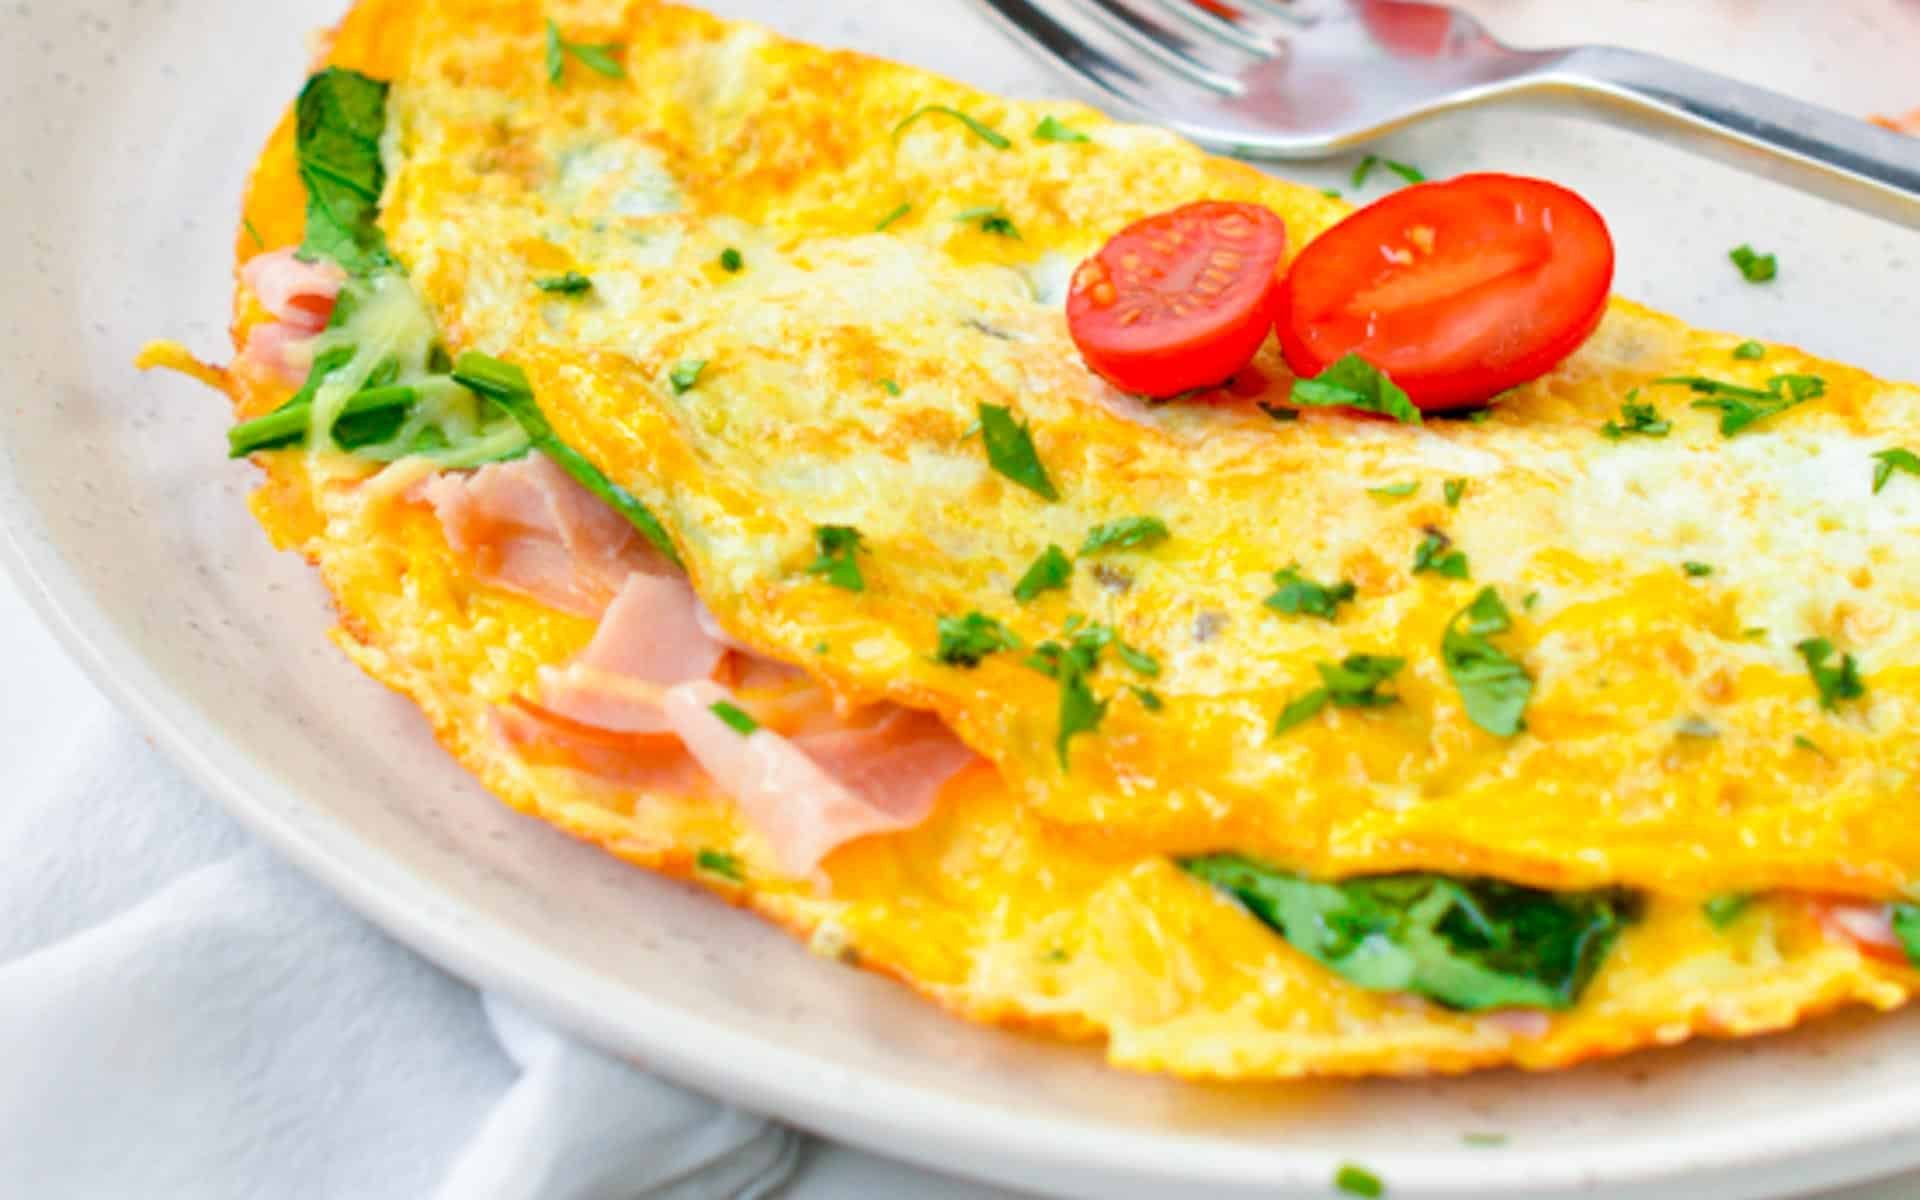 This omelette recipe is an easy 3-egg omelette for an easy, high-protein single-serve breakfast ready in 10 minutes. If you love eggs for breakfast, this is the best omelette to start the day and feel full for hours.